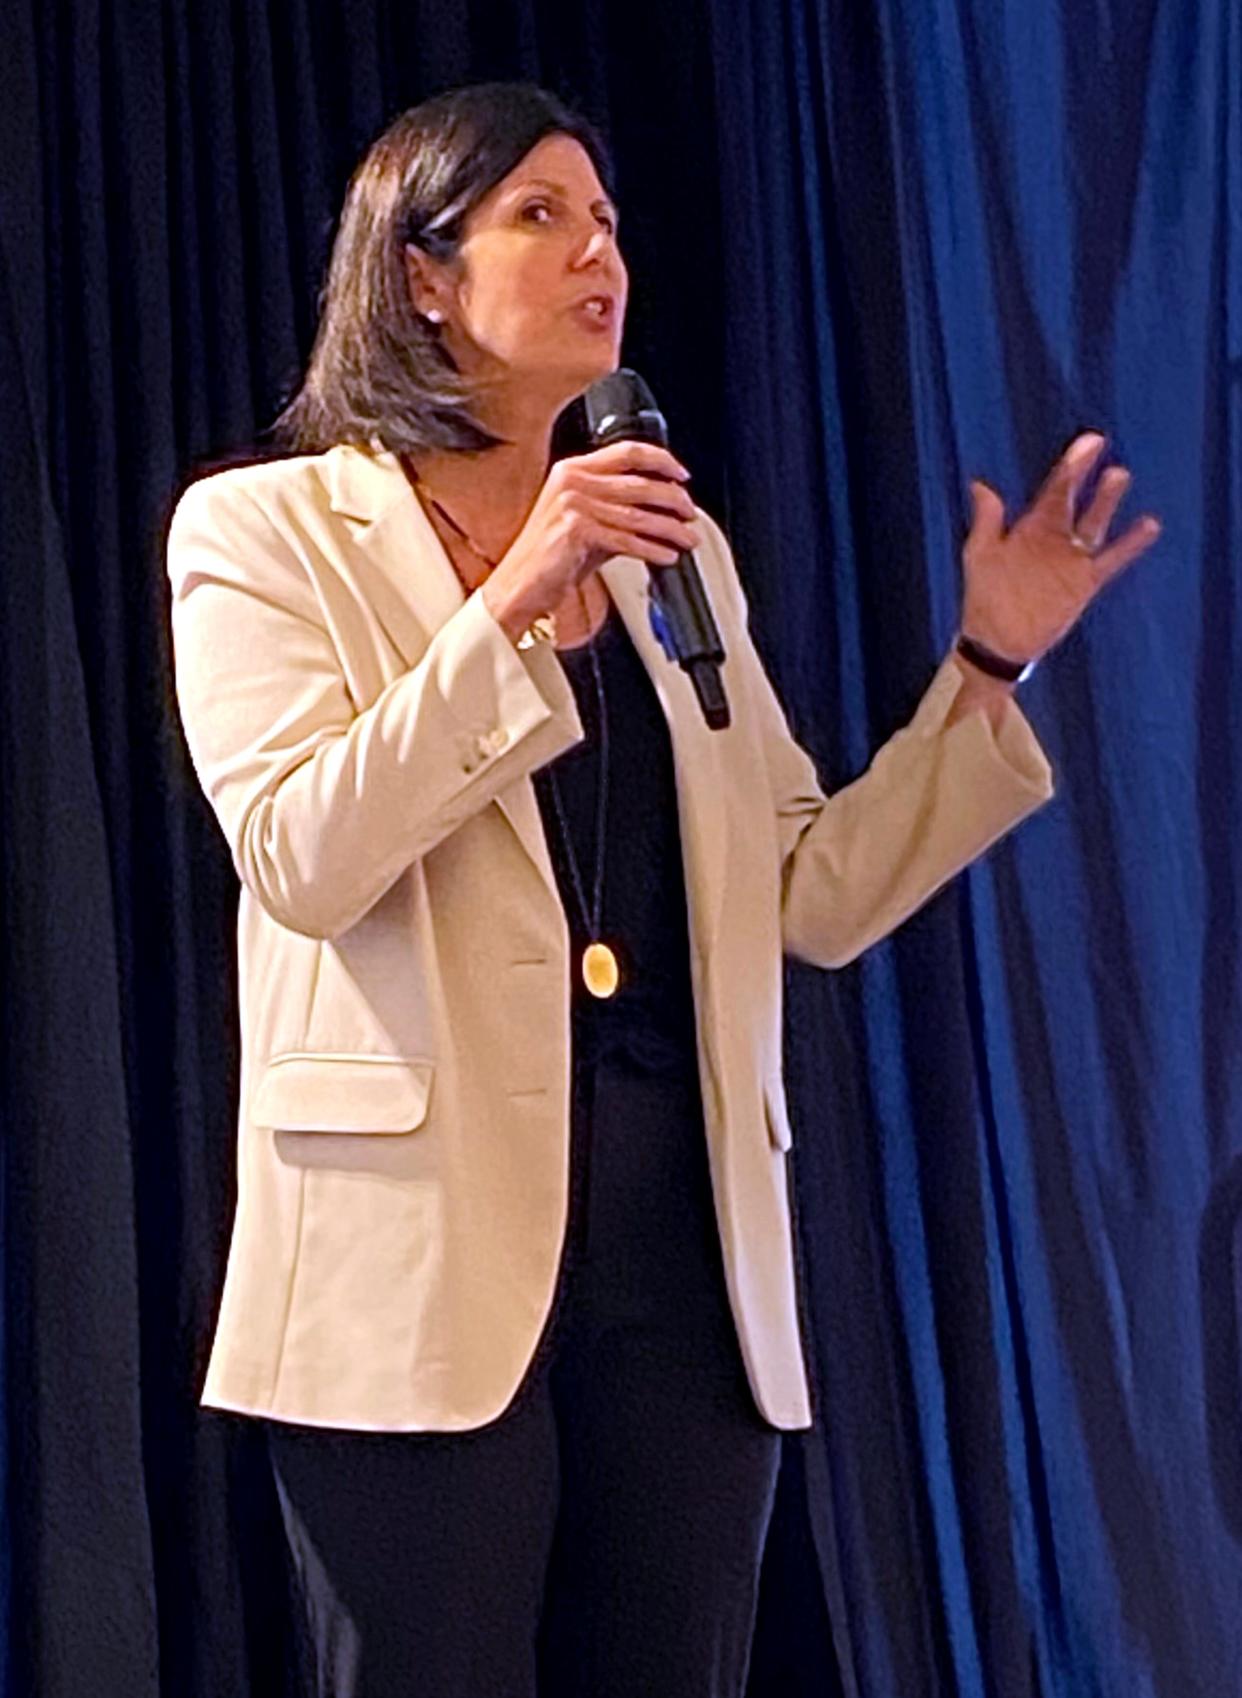 Alison Lebovitz, author, podcaster and host of "The A List with Alison Lebovitz" on PBS, speaks at the Jewish Federation of Greater Oklahoma City's 2023 Fall Luncheon at the Oklahoma City Golf & Country Club.